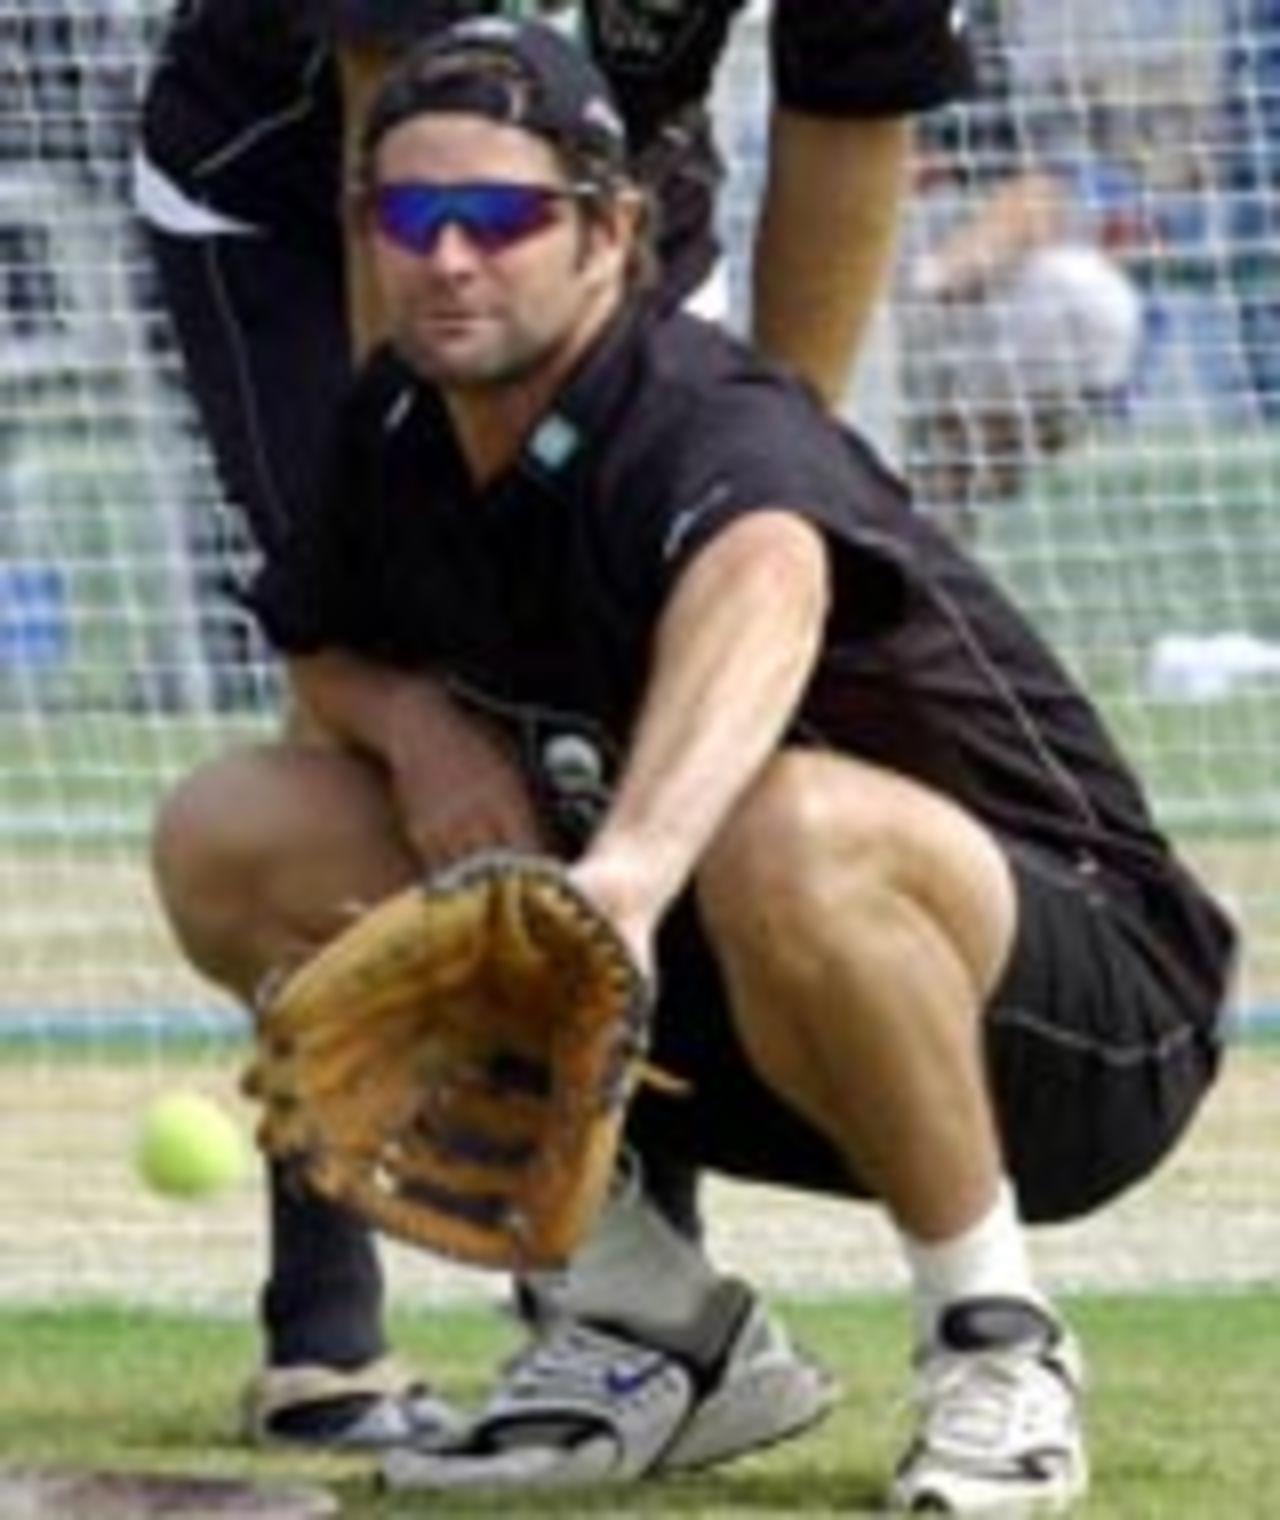 Chris Cairns plays baseball during practice at Hyderabad, TVS Cup 2003